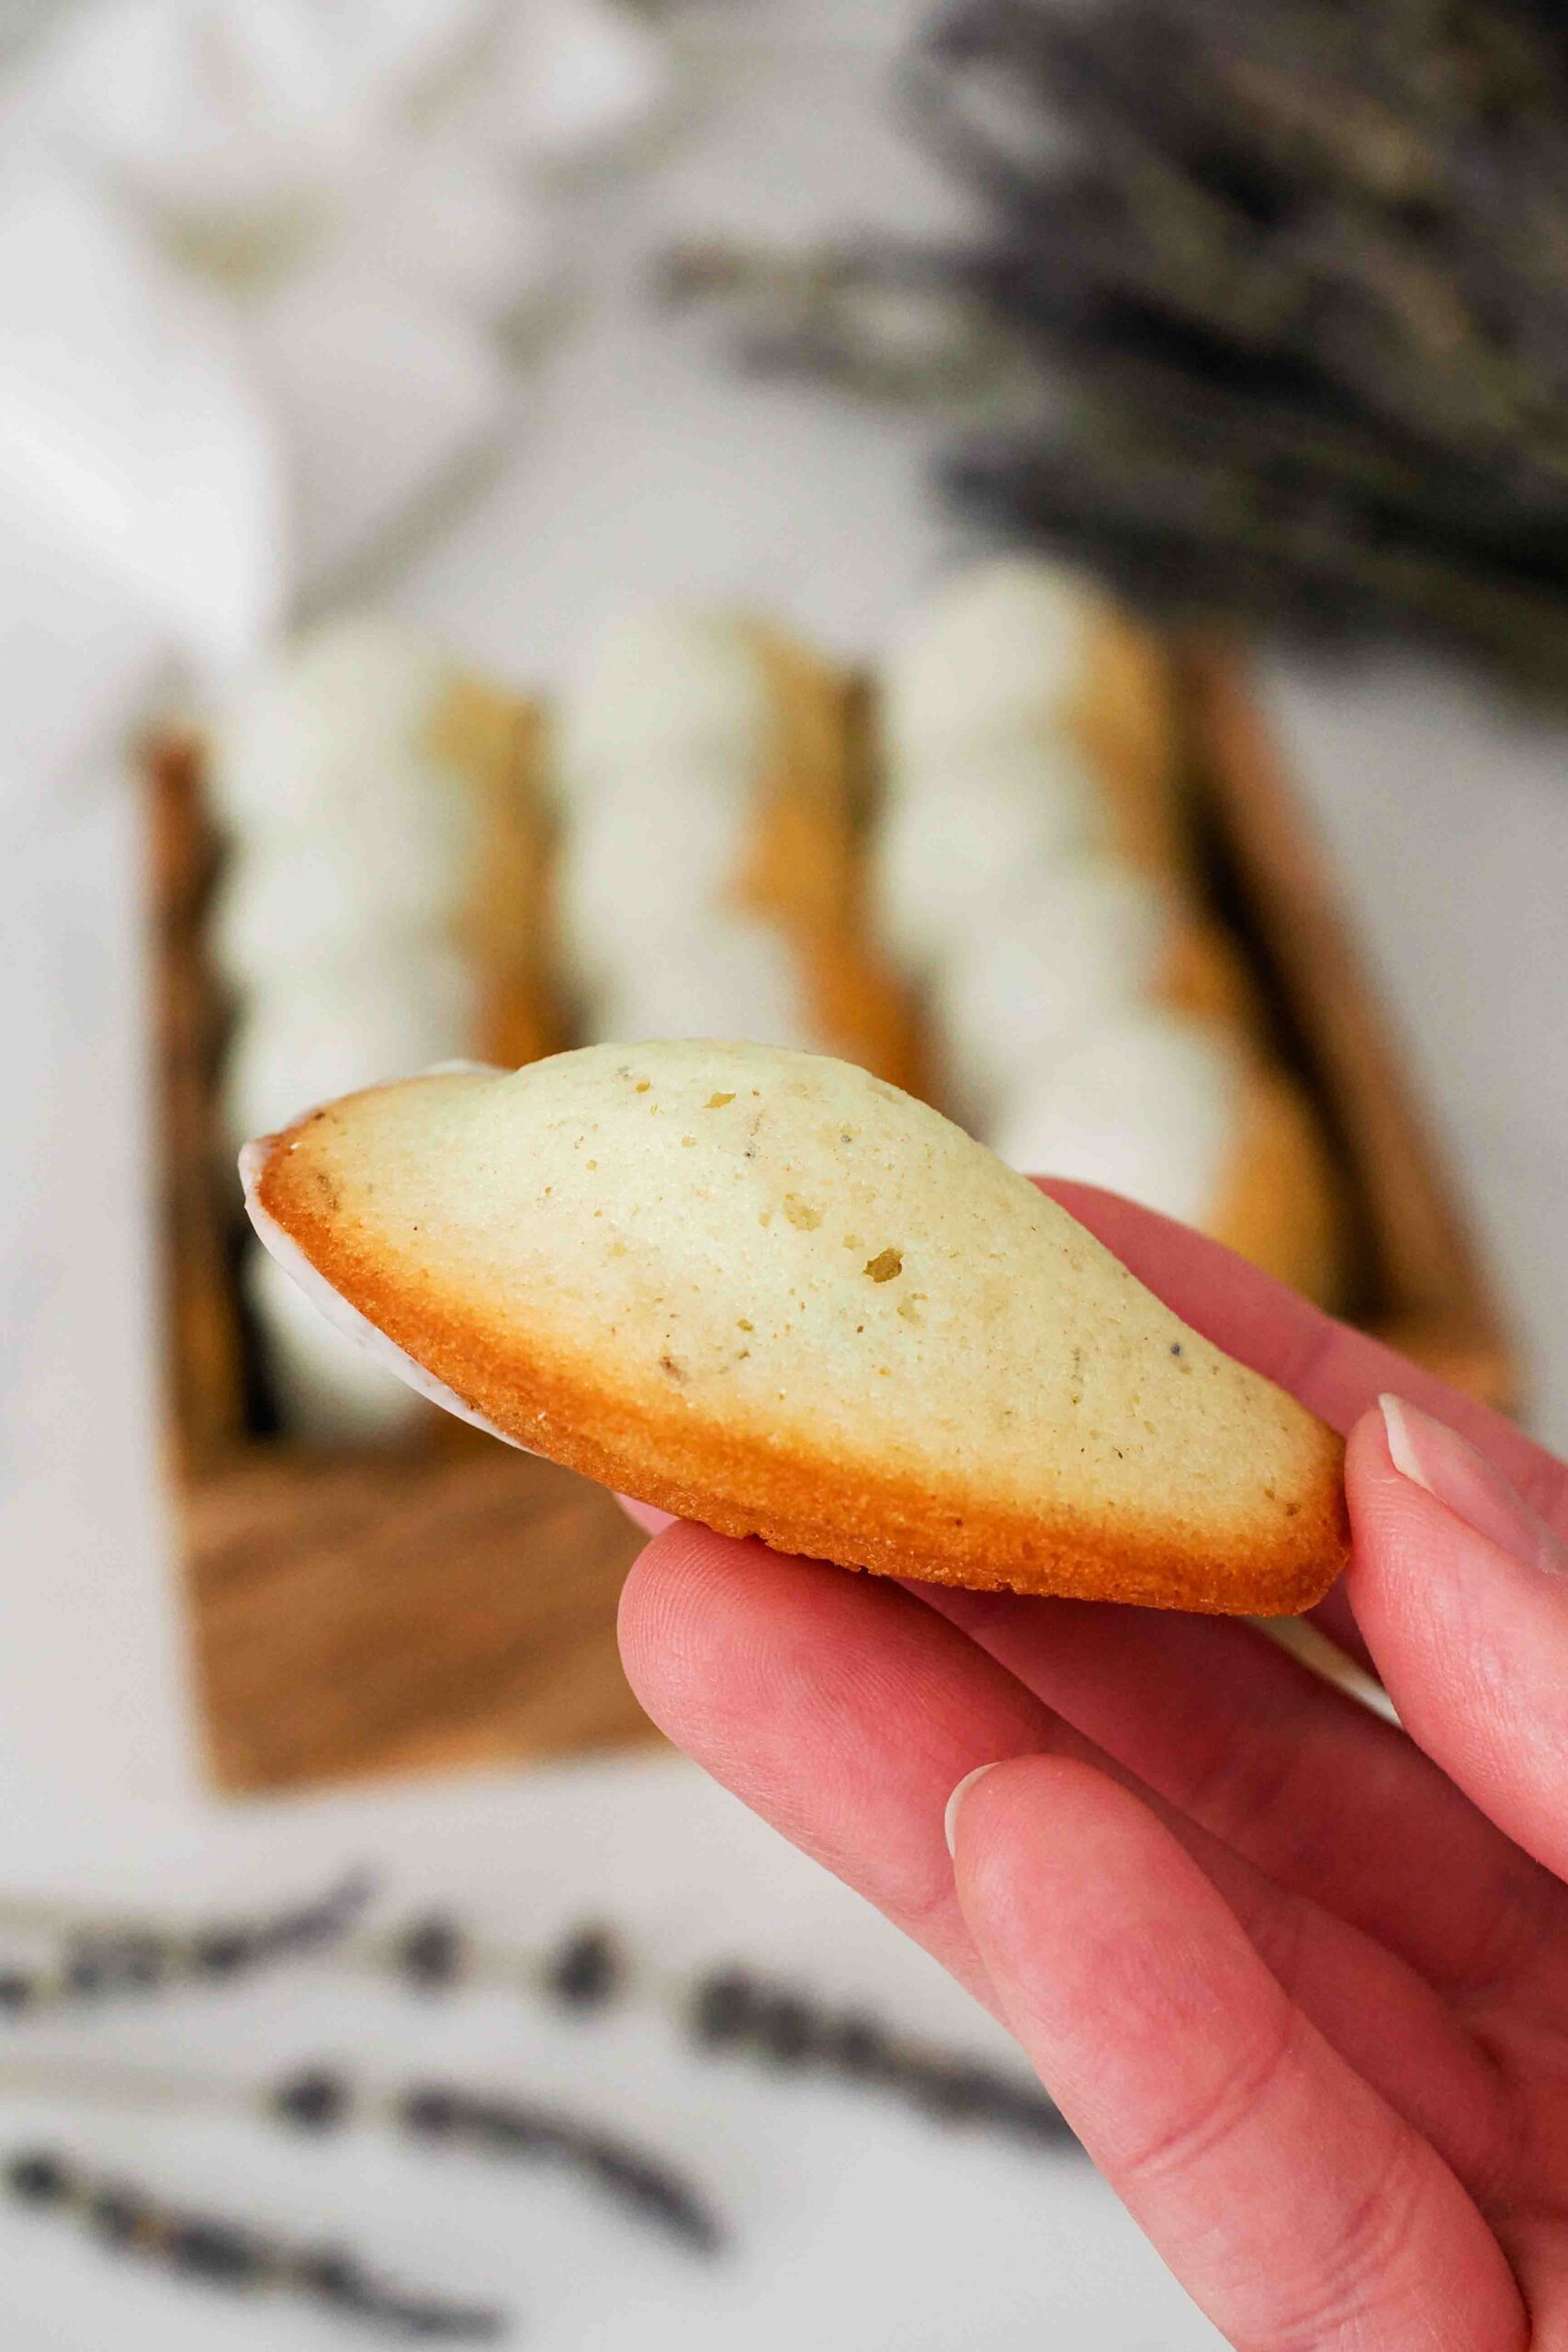 A hand holds up a lavender madeleine with a prominent hump.